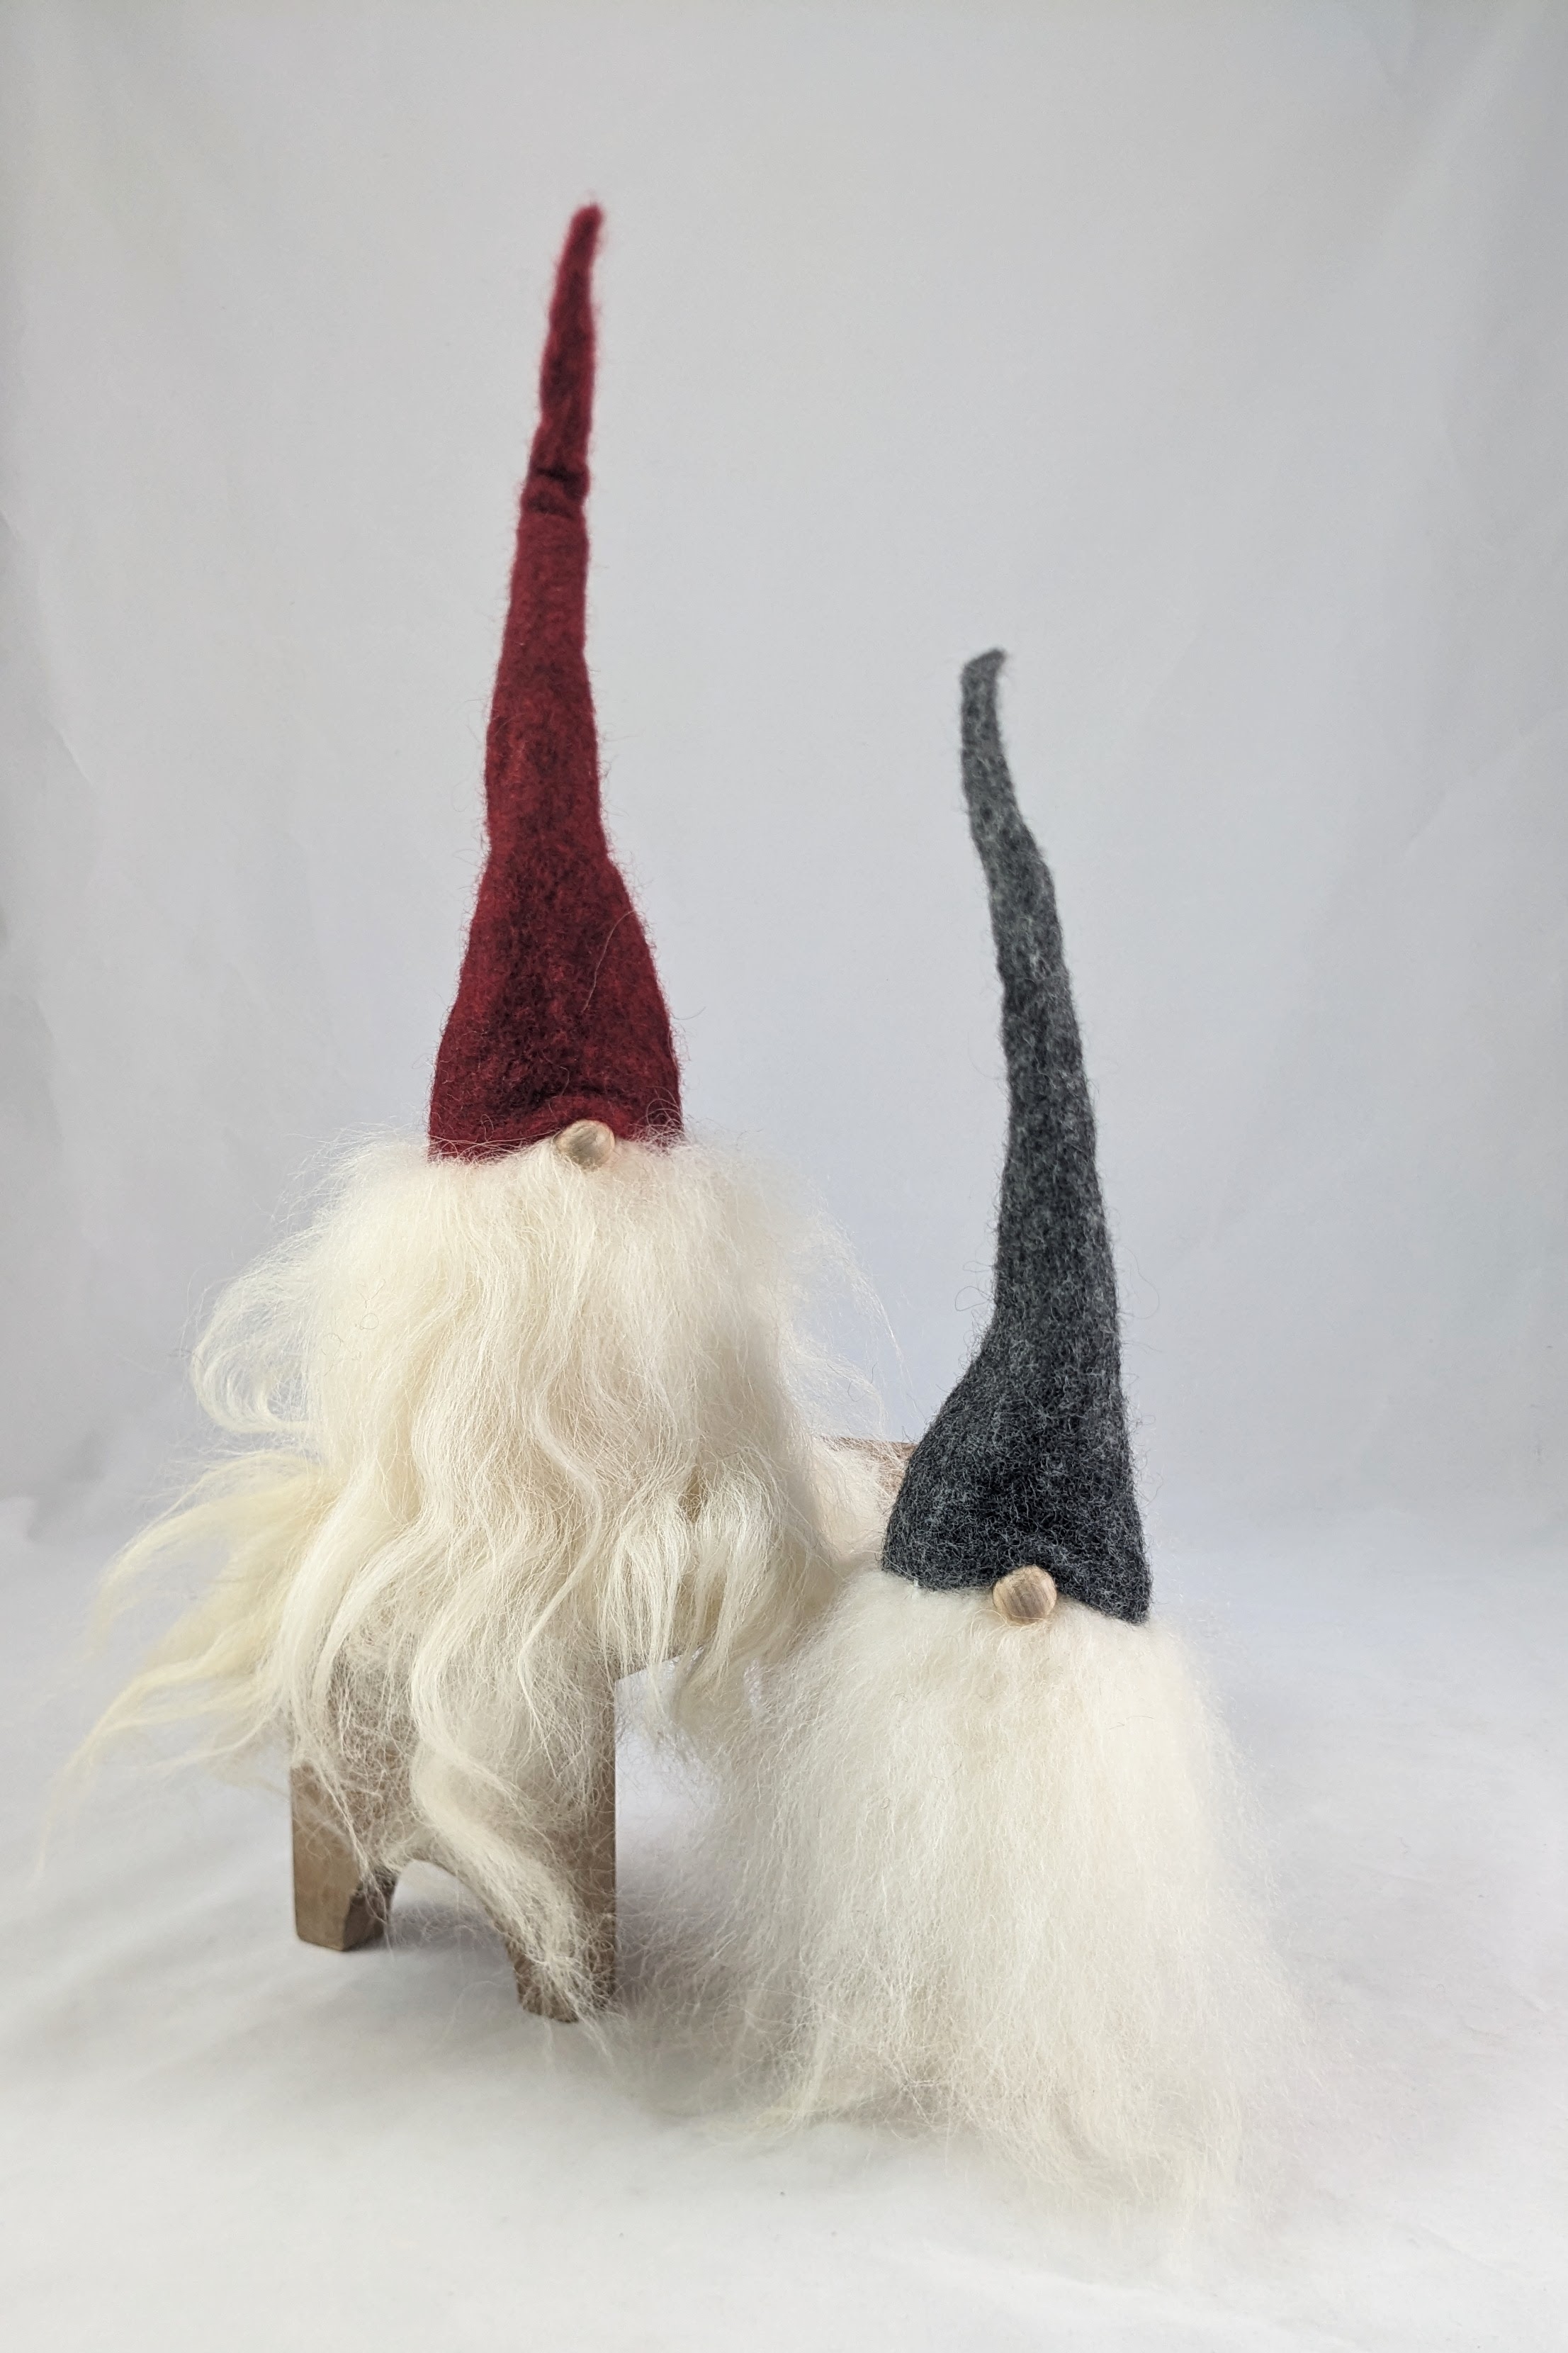 2 tomtes with long wool beards, one with a burgundy tall hat is propped up on a wooden stand and the base is level with the nose of the gray hat tomte on the ground.